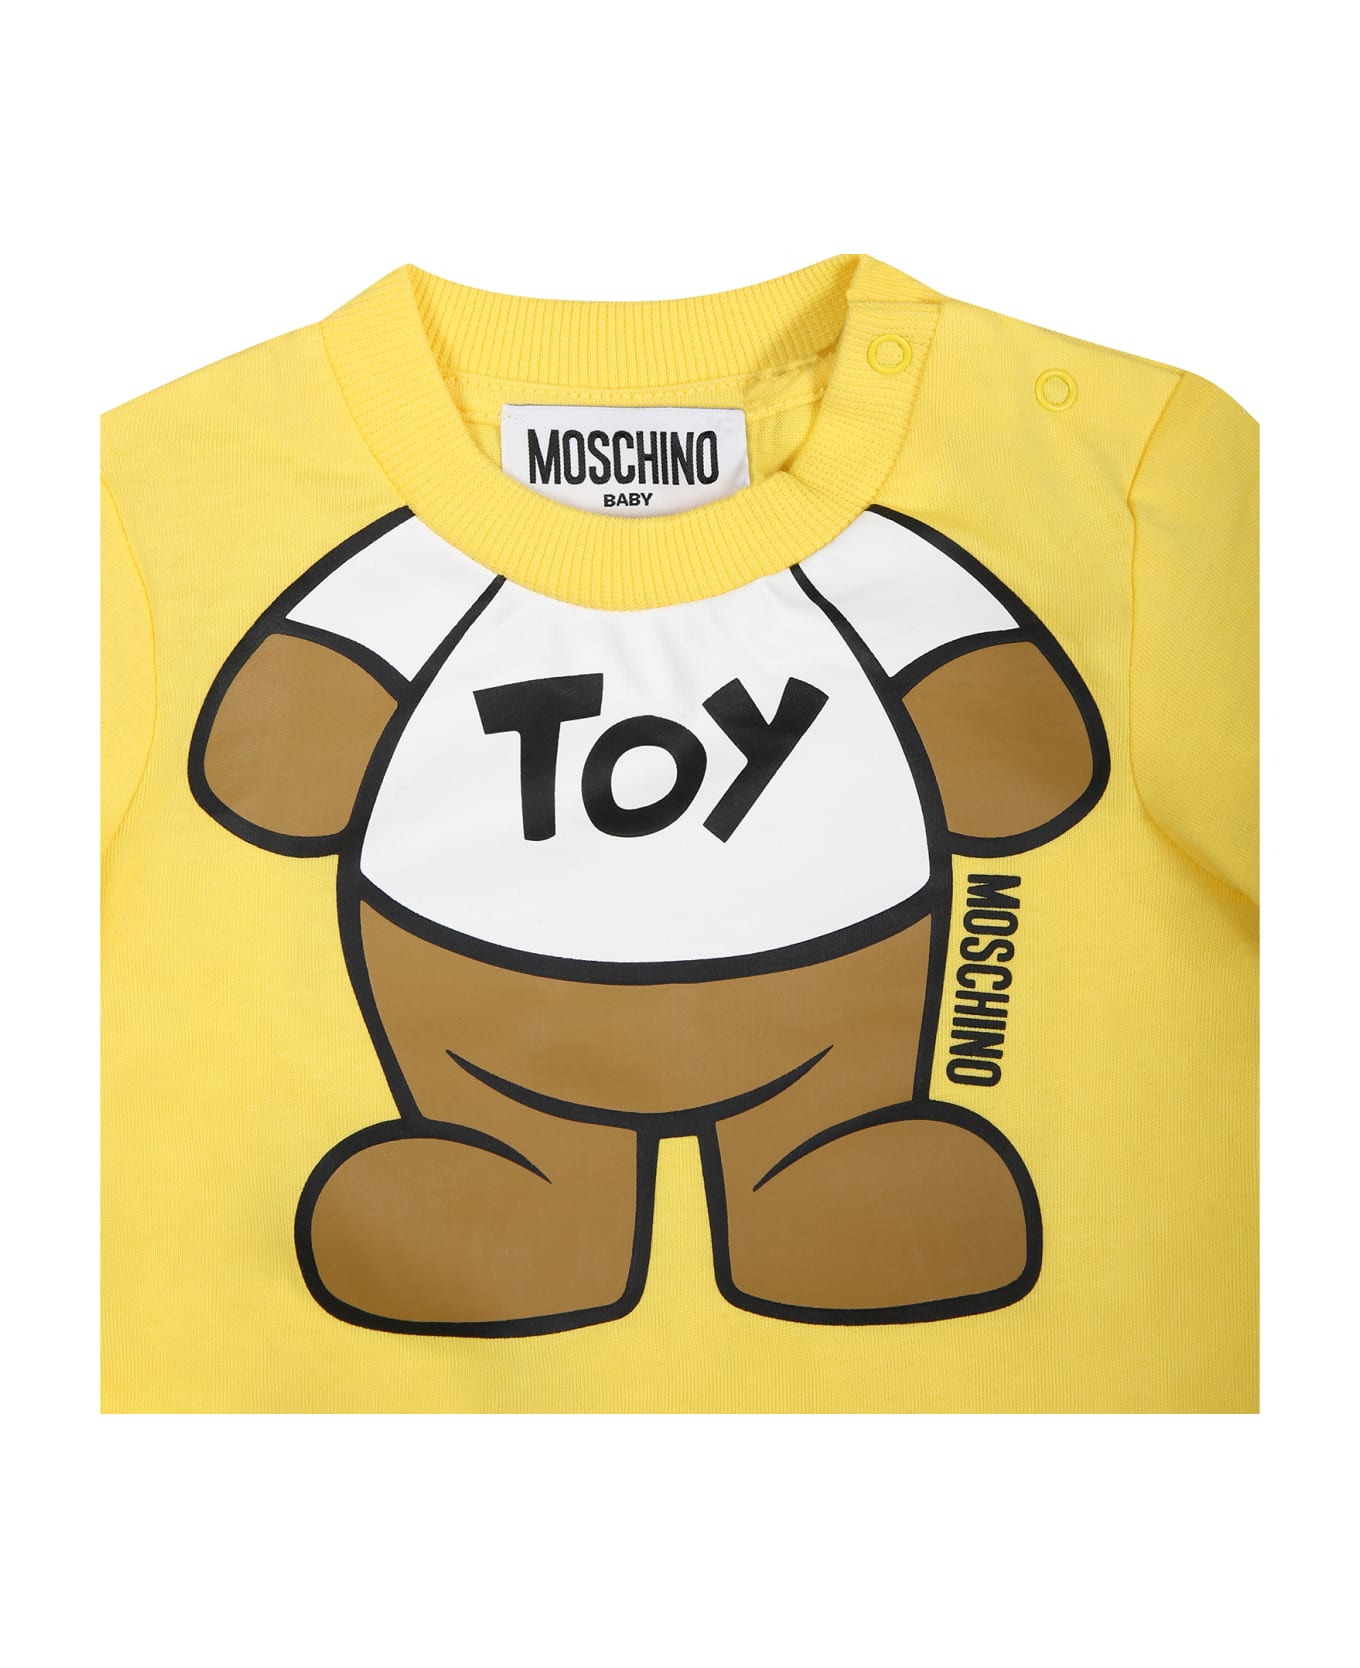 Moschino Yellow Romper For Baby Kids With Teddy Bear - Yellow